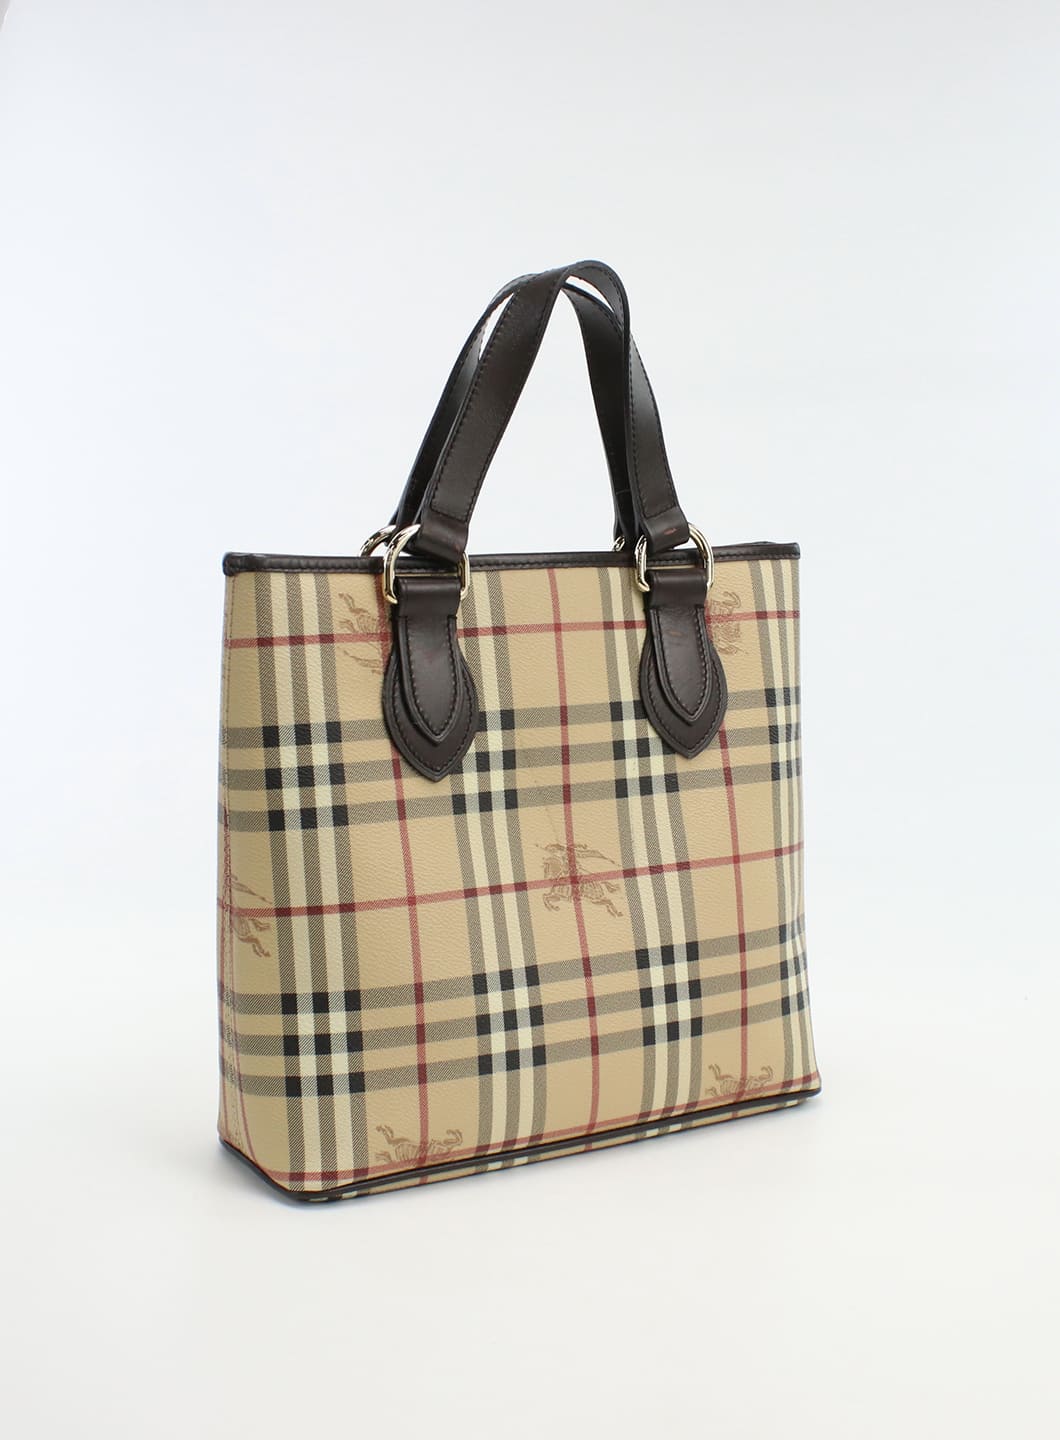 Burberry ノバチェックトートバッグ